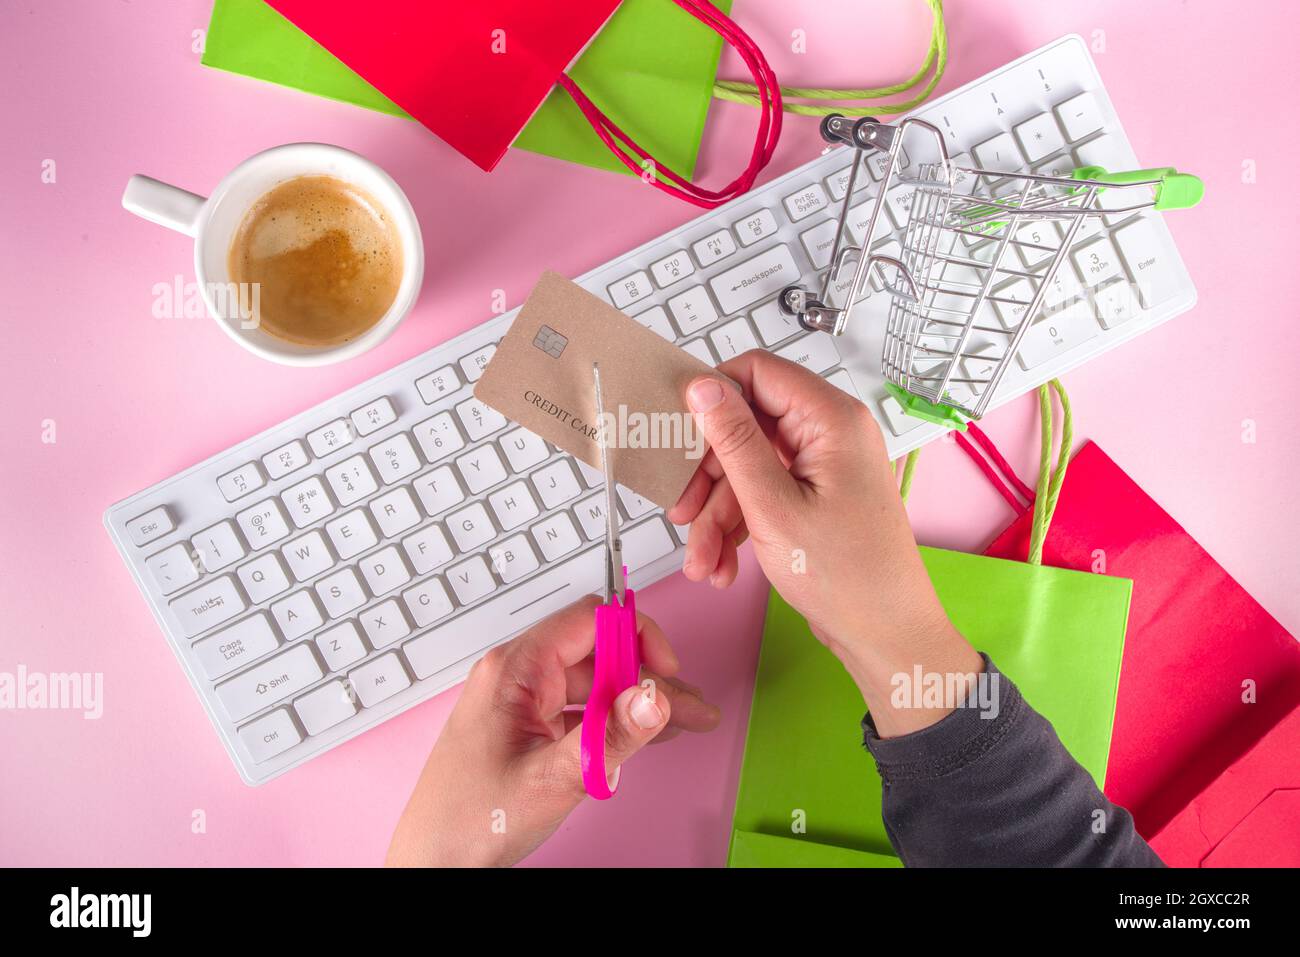 Buy nothing day background, International day of protest against consumerism and shopping days concept Stock Photo